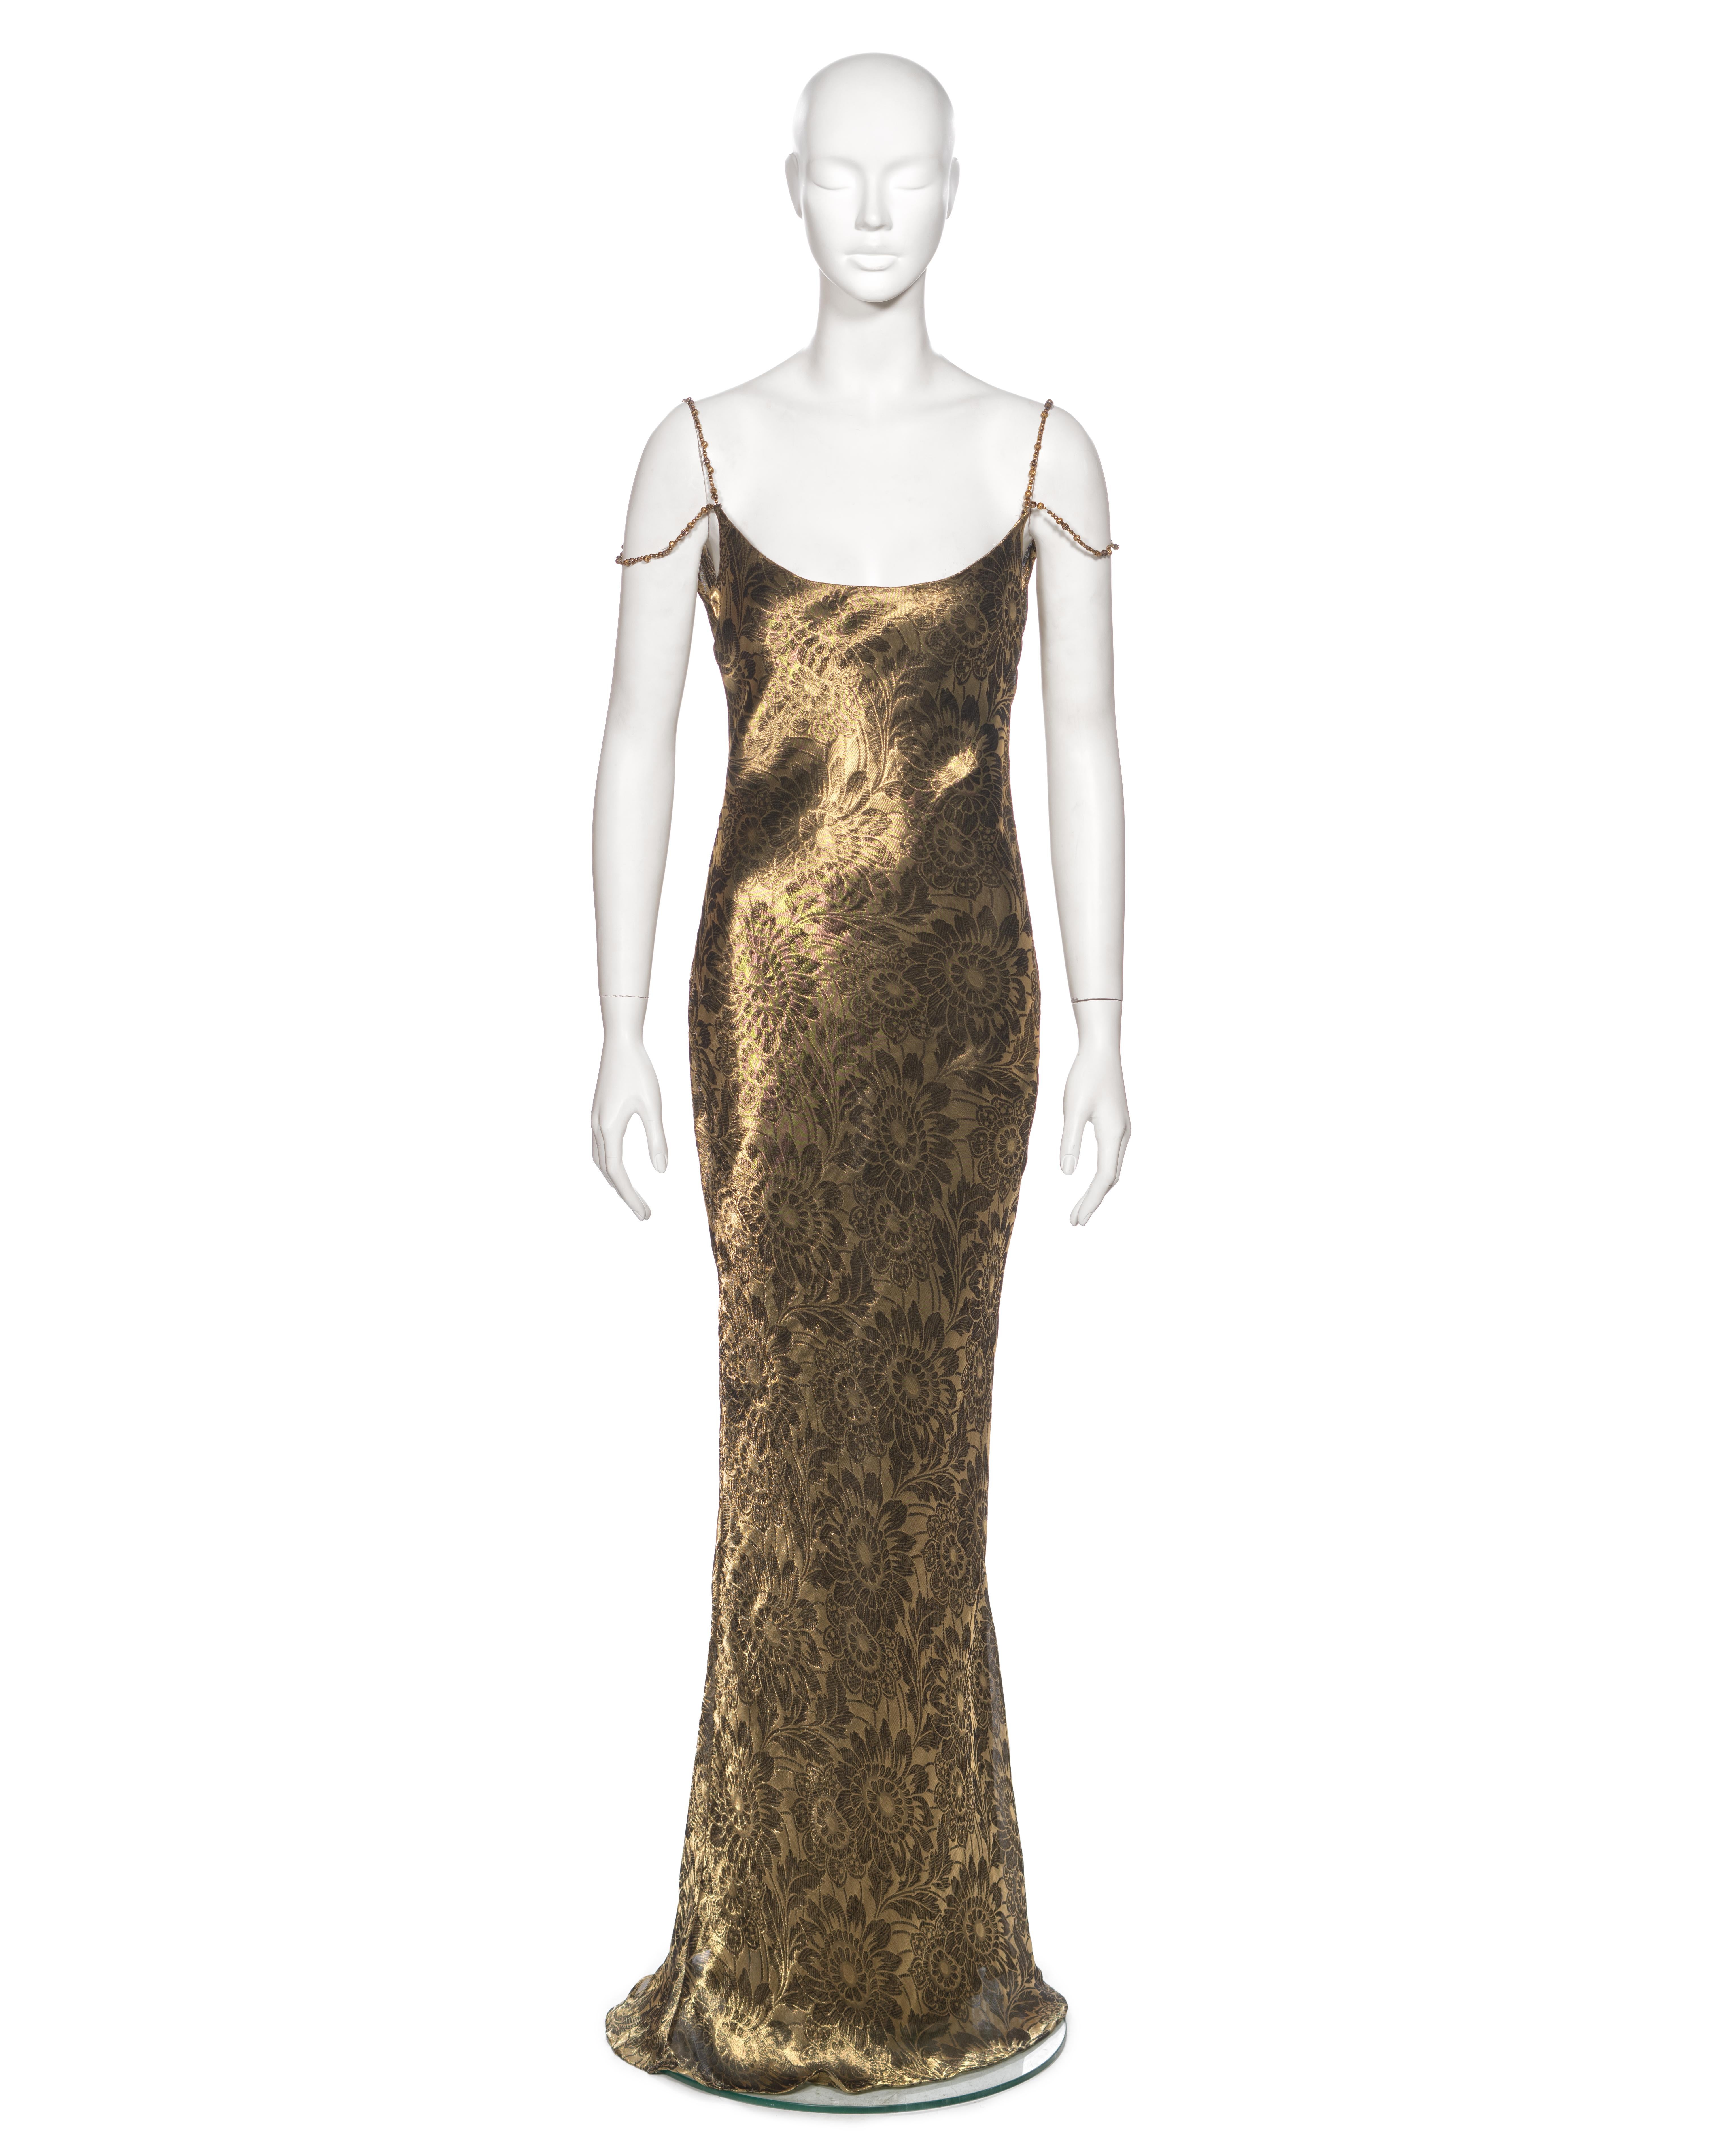 ▪ Archival Christian Dior Runway Evening Dress
▪ Creative Director: John Galliano
▪ Fall-Winter 1998
▪ Sold by One of a Kind Archive
▪ Museum Grade 
▪ Crafted from a metallic antique gold tone bias-cut lurex silk damask, featuring an exquisite woven